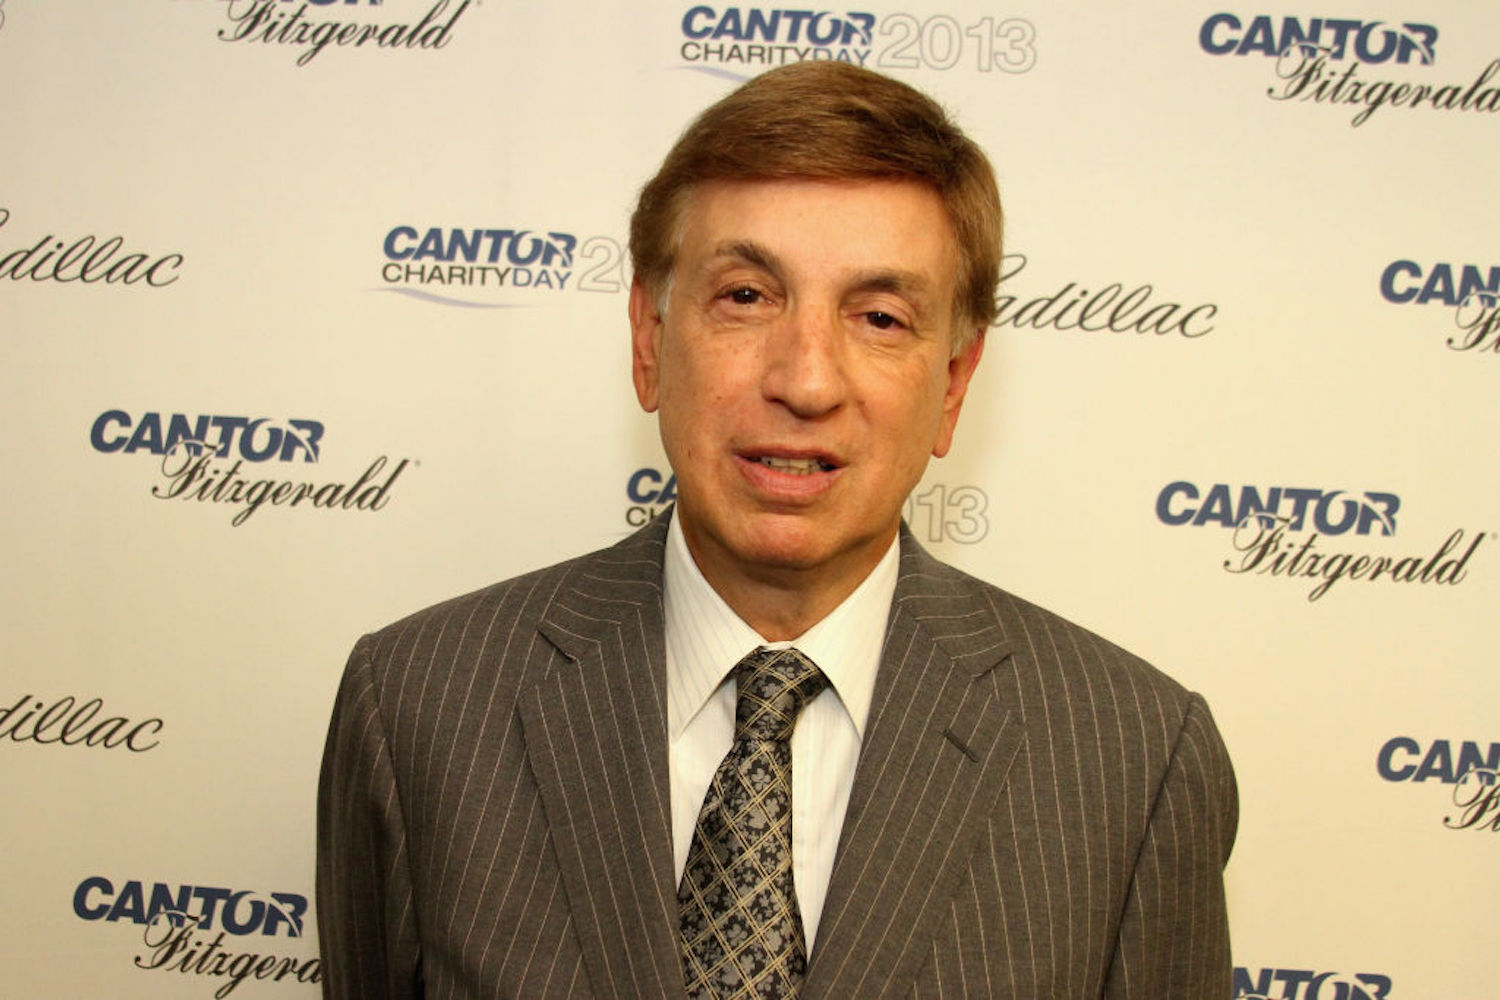 Marv Albert is still calling NBA games 23 years after he pleaded guilty to assault and battery in bizarre 1997 sex case.